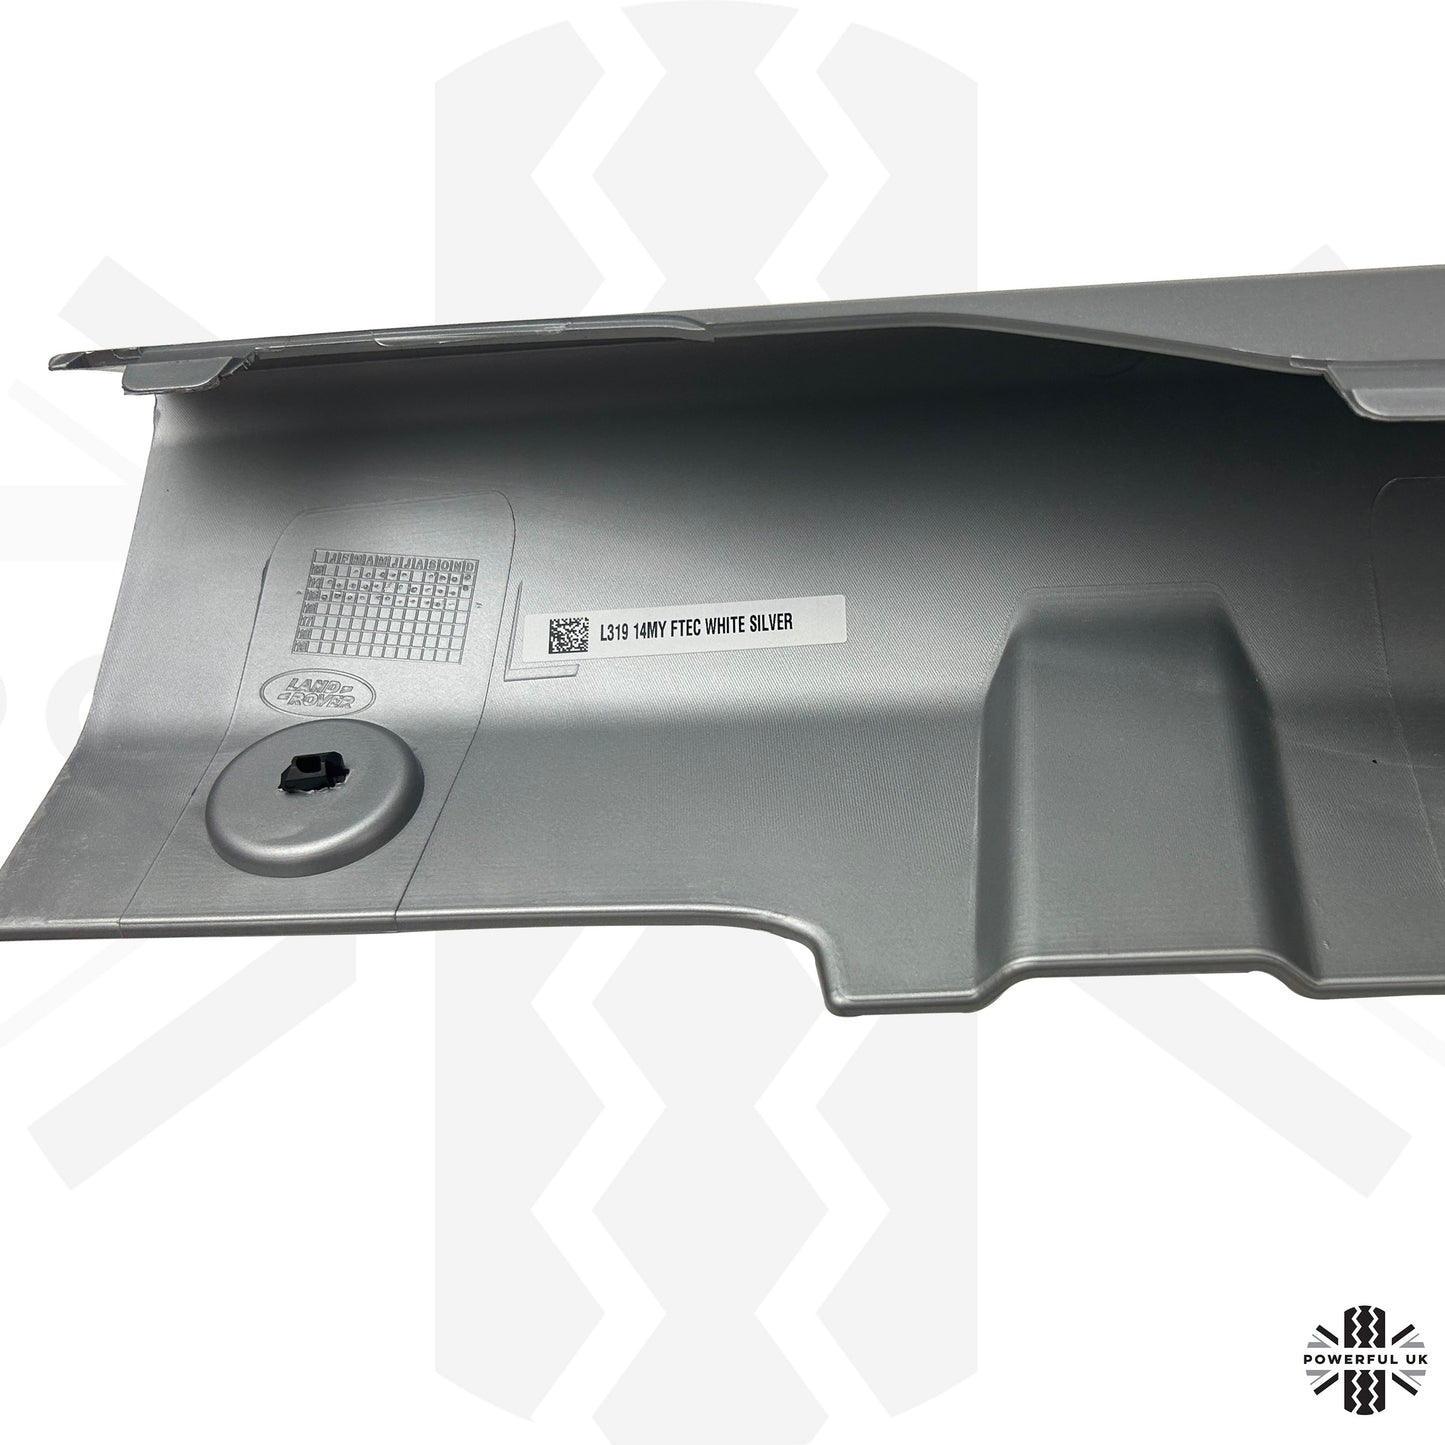 Front Tow Eye Cover in Silver for Land Rover Discovery 4 Facelift 2014-16 - Genuine